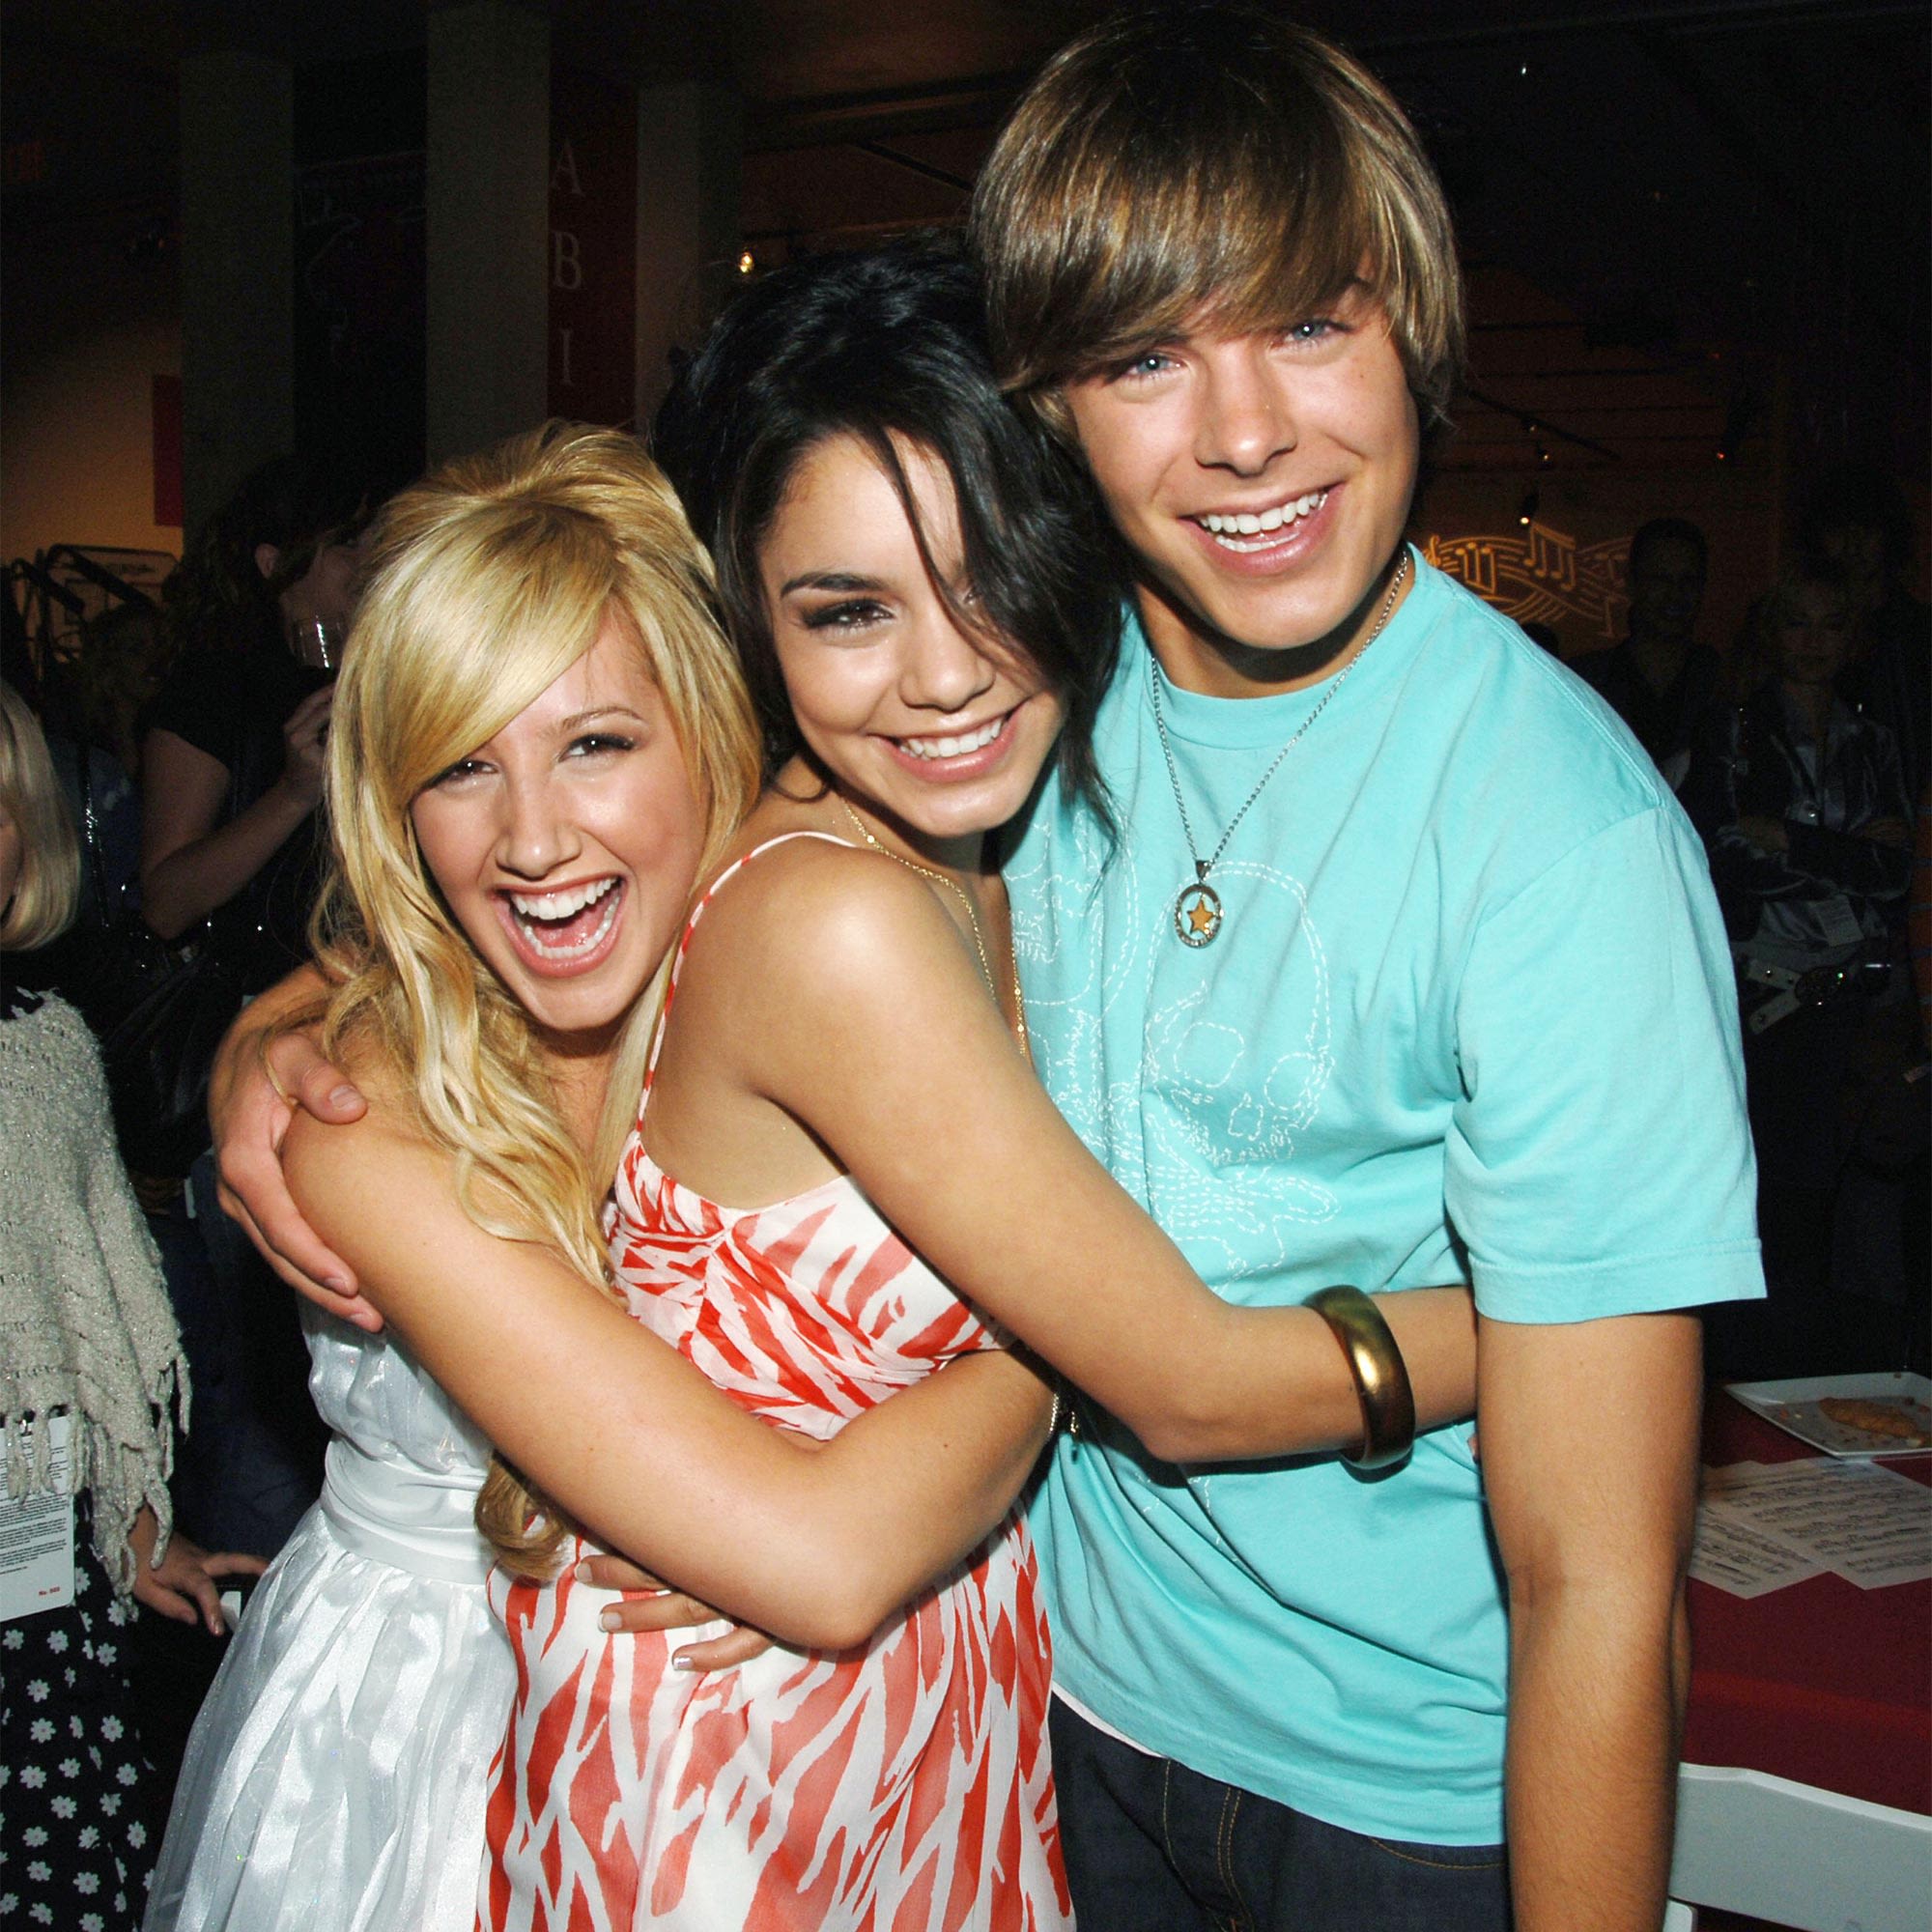 Zac Efron Teases ‘Family Reunions’ With Pregnant ‘HSM’ Costars Vanessa Hudgens and Ashley Tisdale